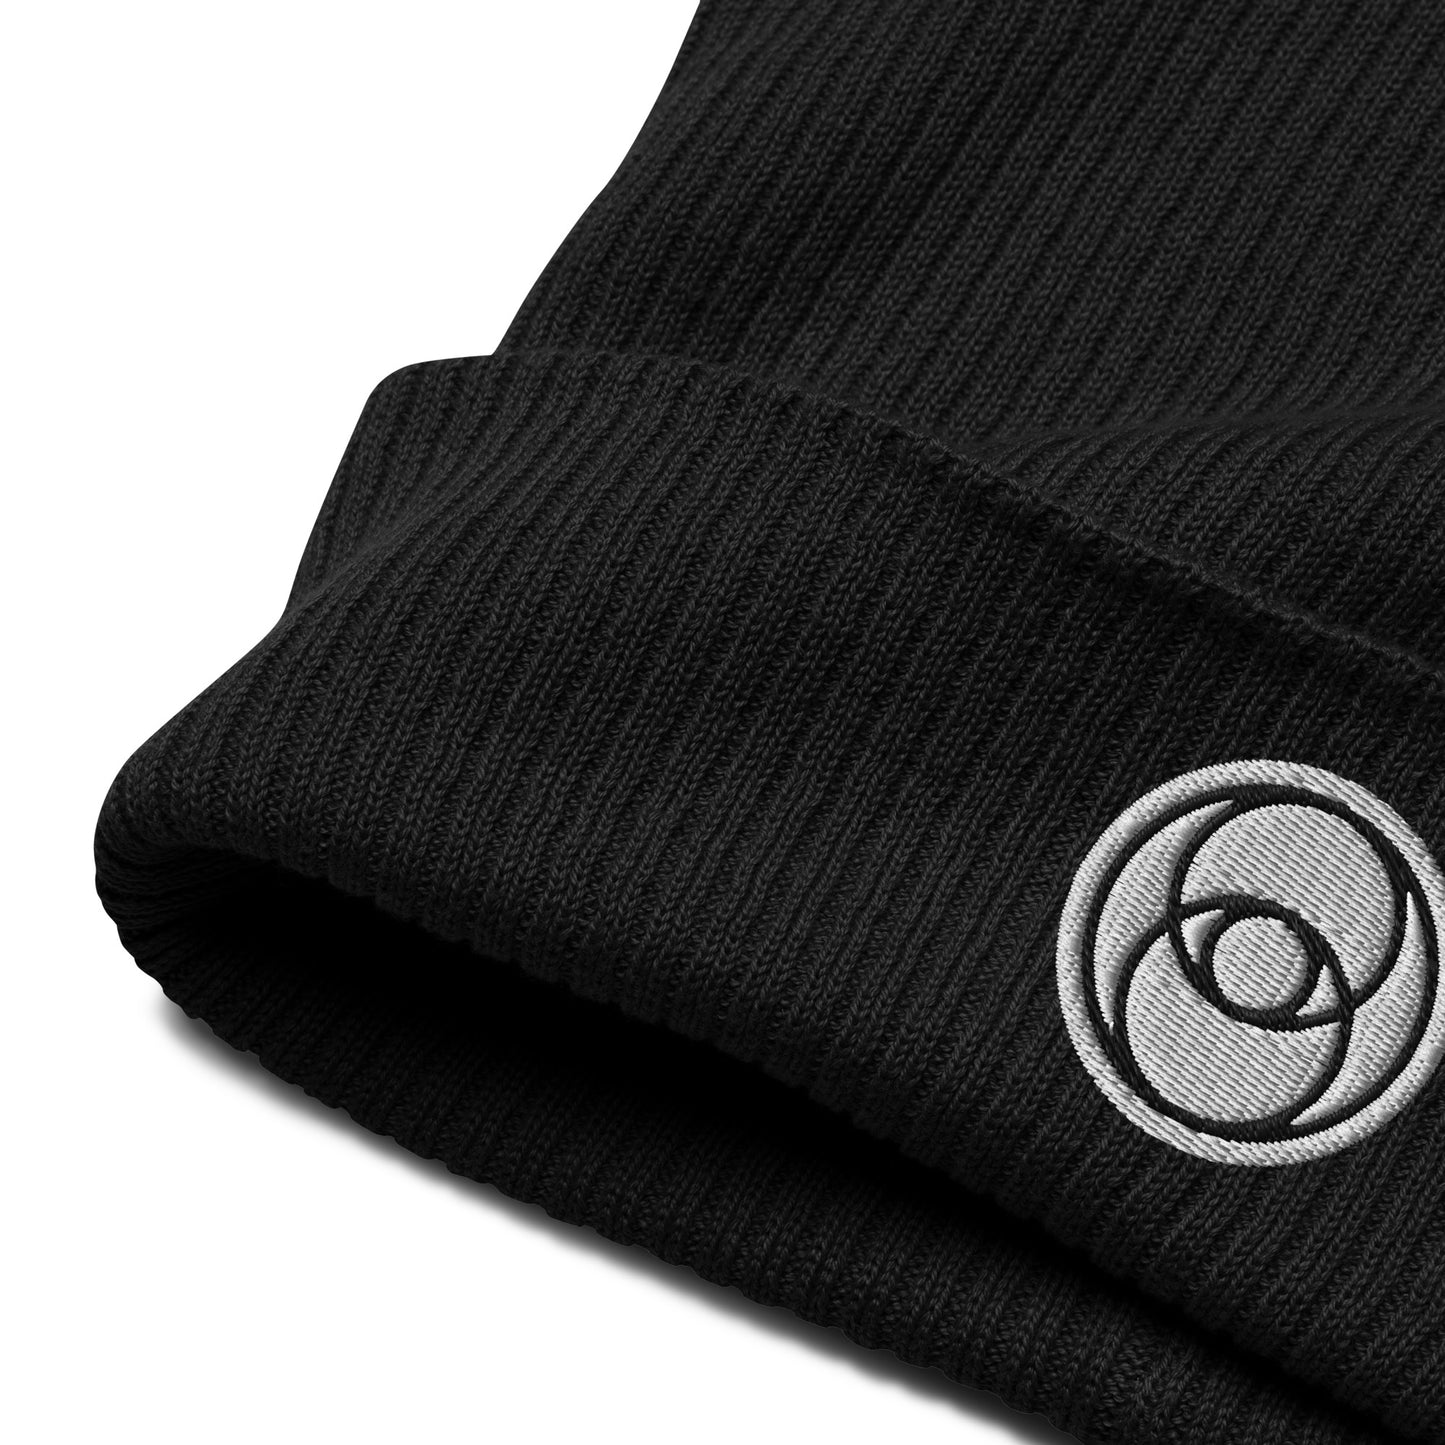  The Vesica Piscis Organic Cotton Beanie in Midnight Black is all about harmonious unions. Made of organic cotton and featuring a Vesica Piscis embroidery, this piece is something special. The Vesica Piscis symbolizes unity, balance, and connecting with the universe. Our beanies are made with breathable, lightweight fabric and natural materials, so you can stay comfy while you're exploring the mysteries of existence. Grab one of these beanies and add a touch of divinity to your style.